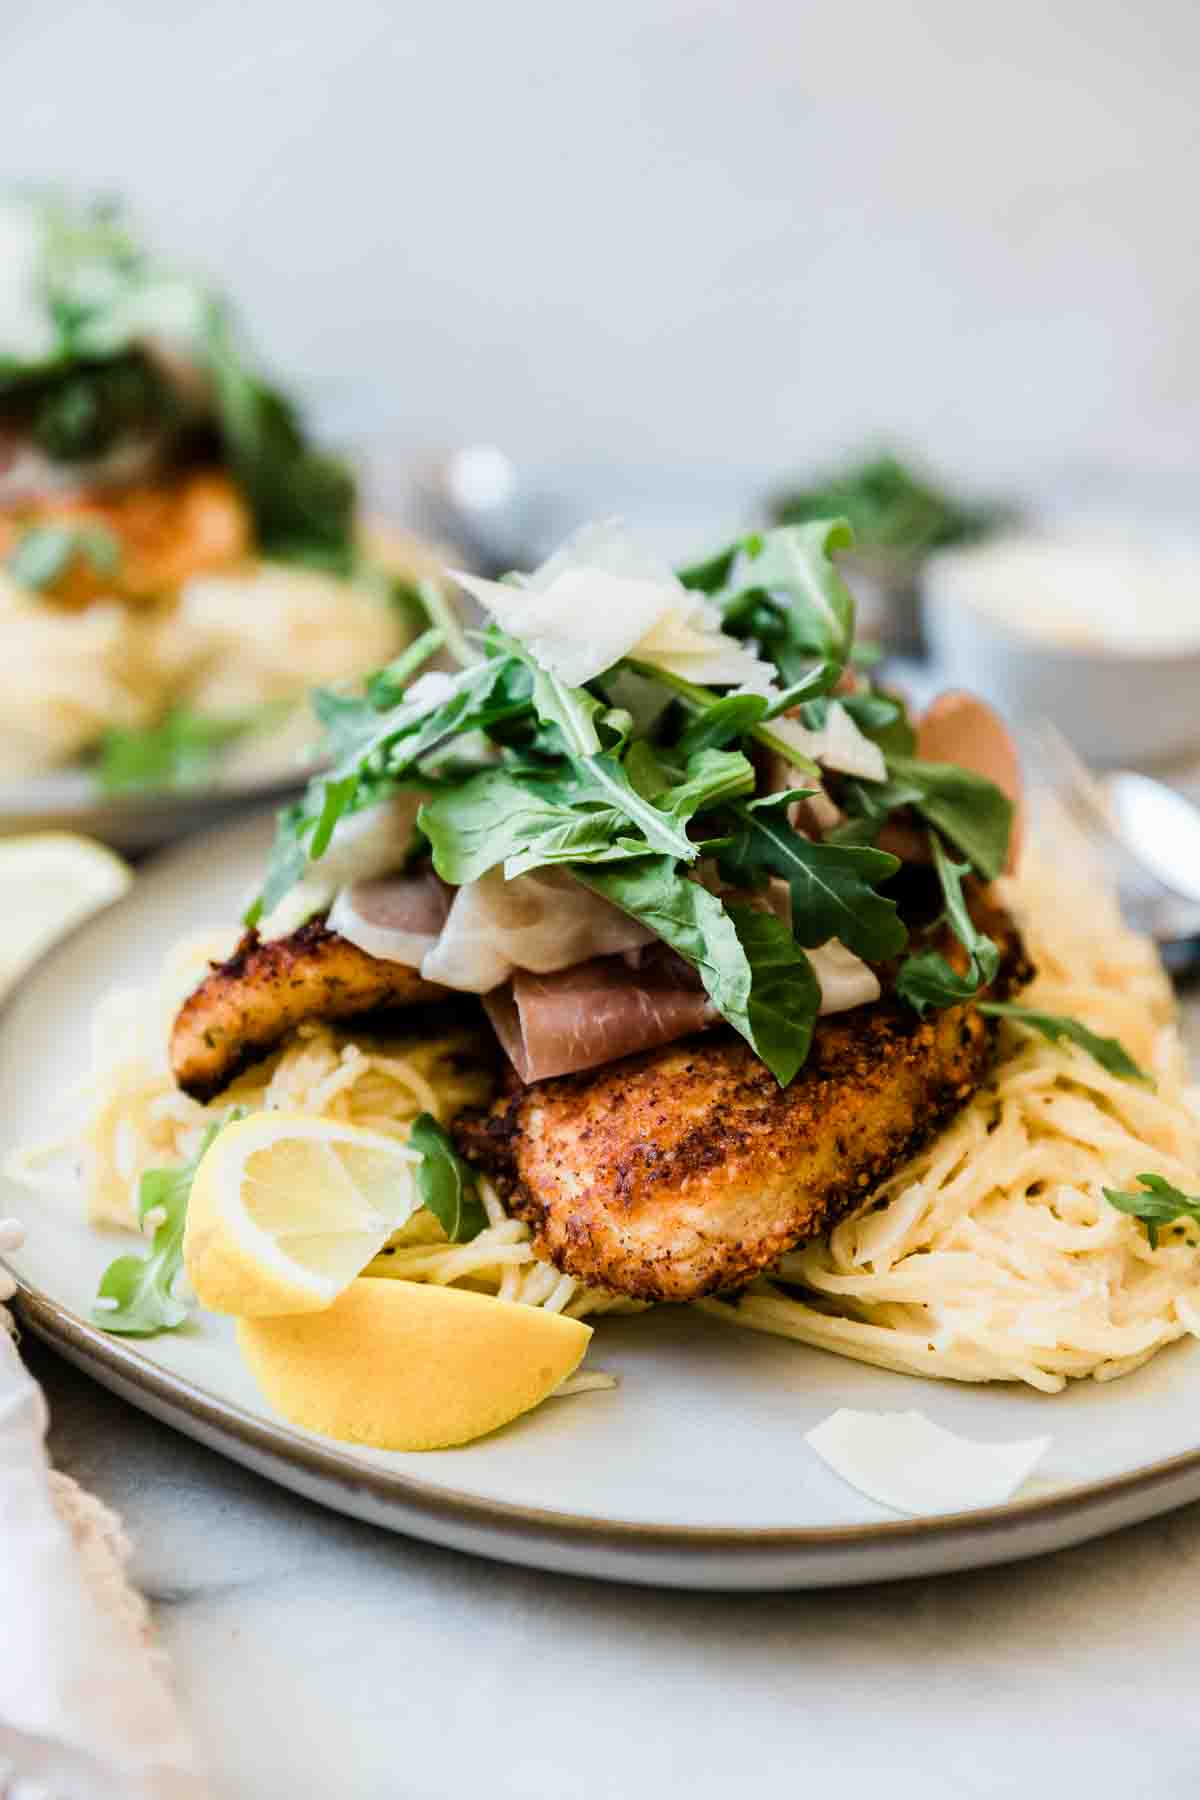 grilled chicken, spaghetti, prociutto, and arugula piled high on a grey plate.